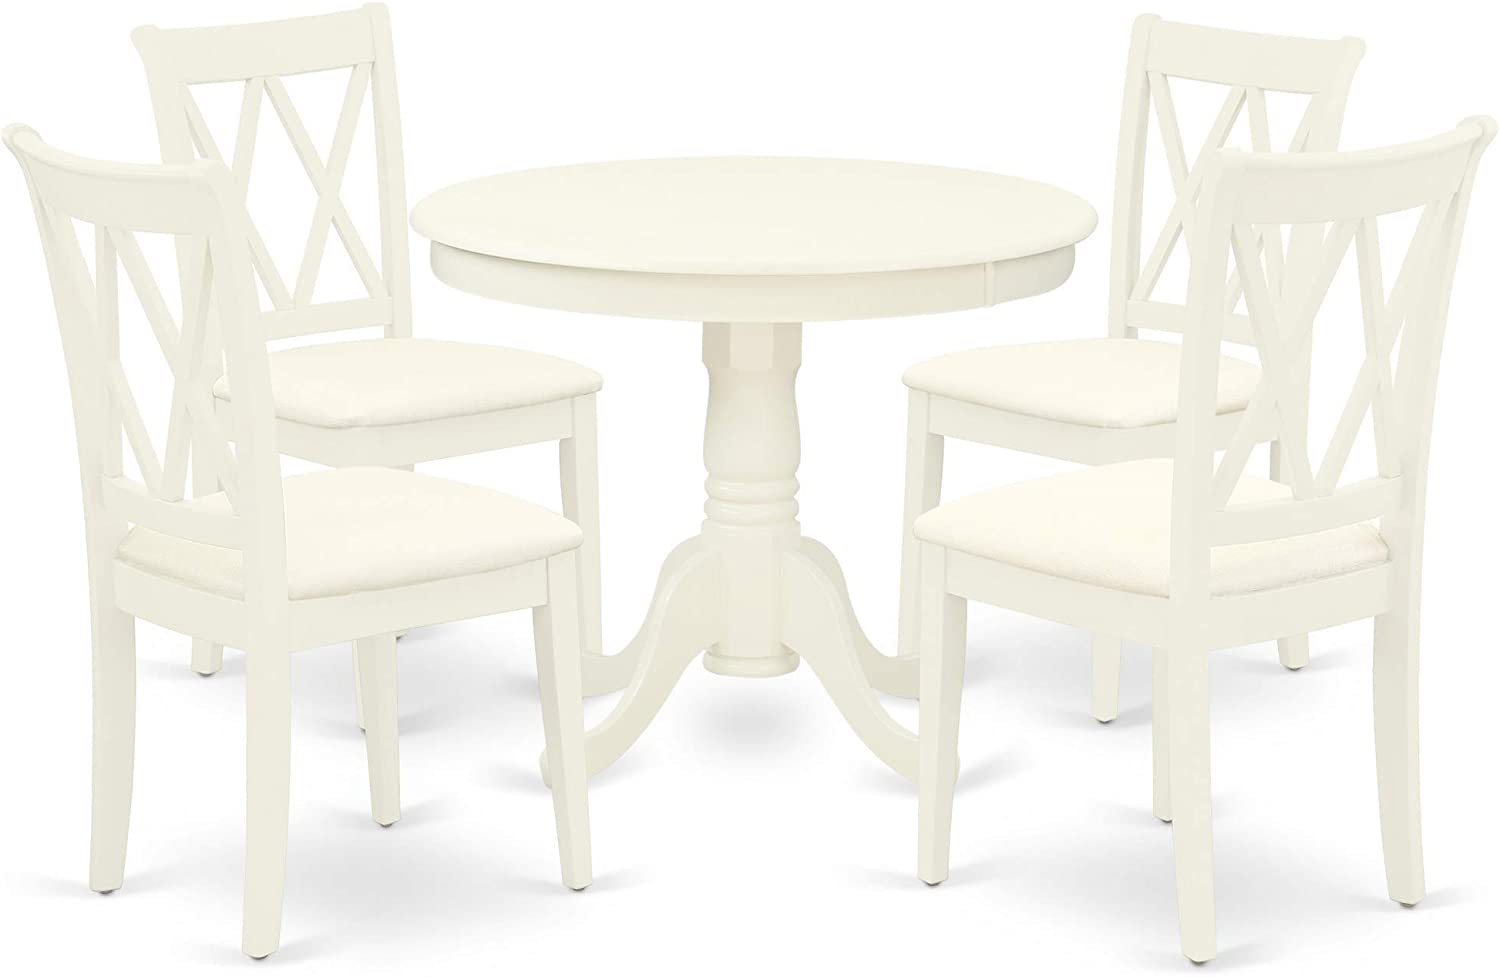 East West Furniture 5Pc Dining Set Includes a Round Dinette Table and Four Double X Back Microfiber Seat Kitchen Chairs, Linen White Finish